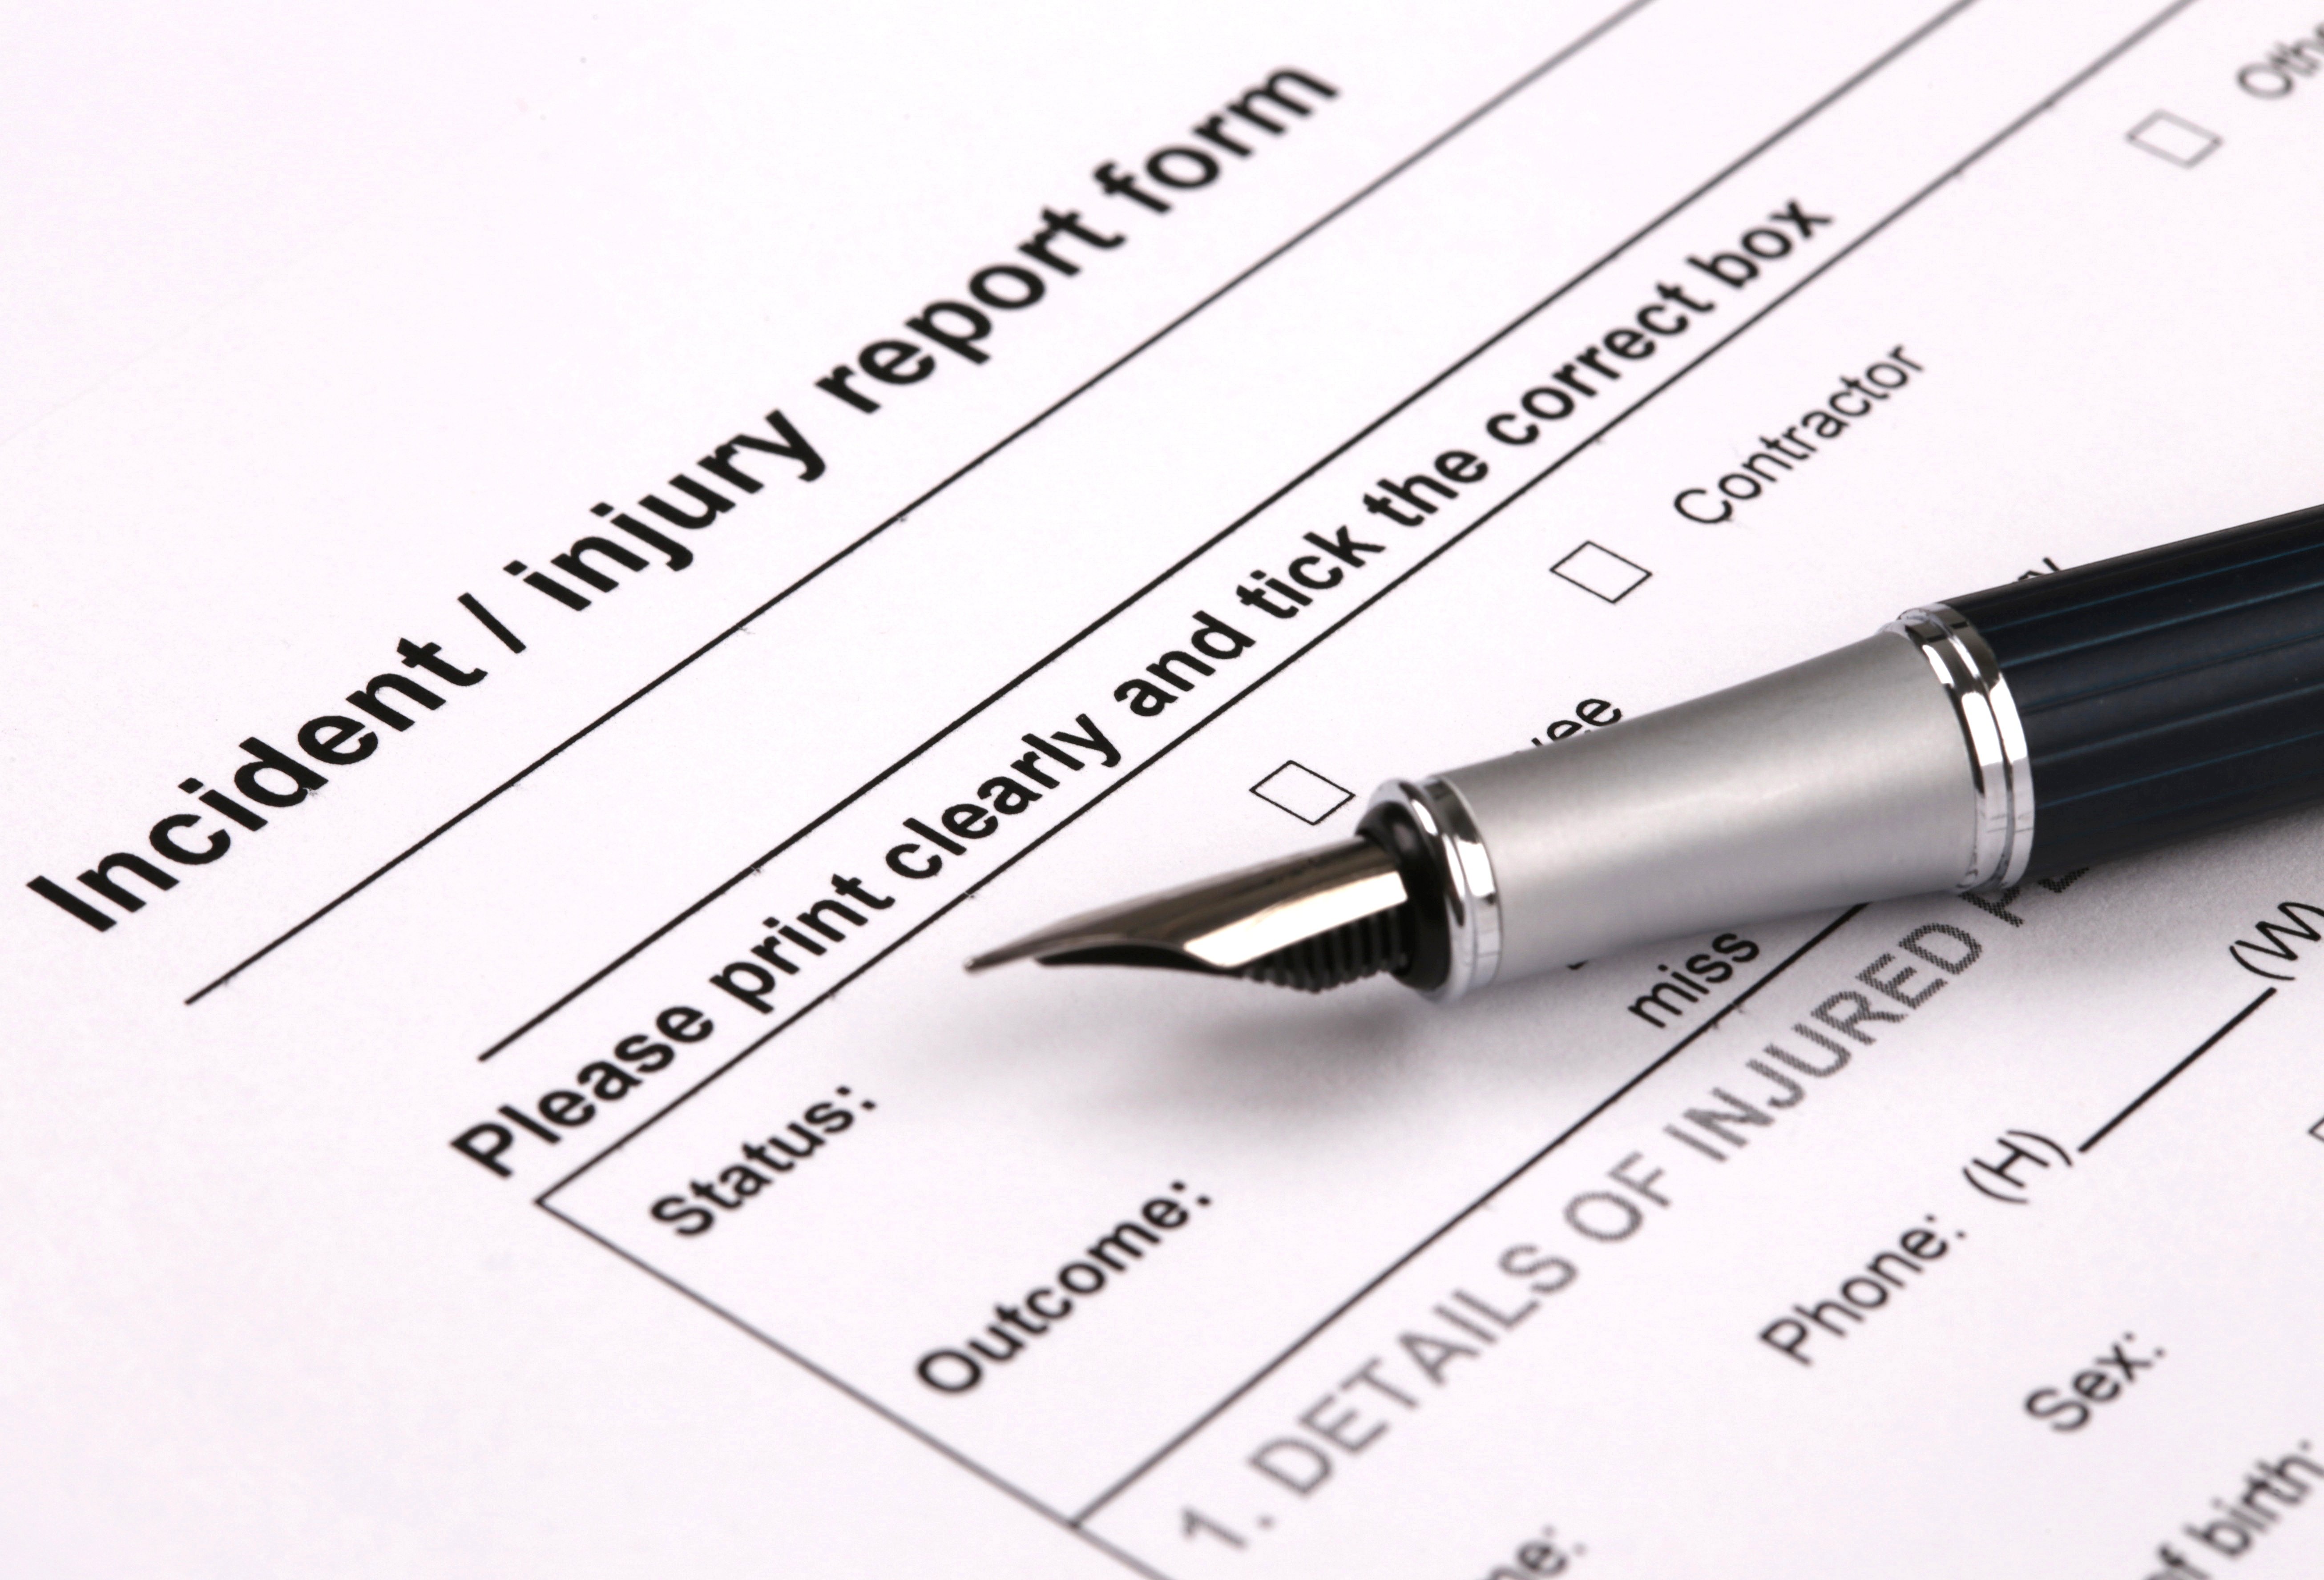 Incident reporting form